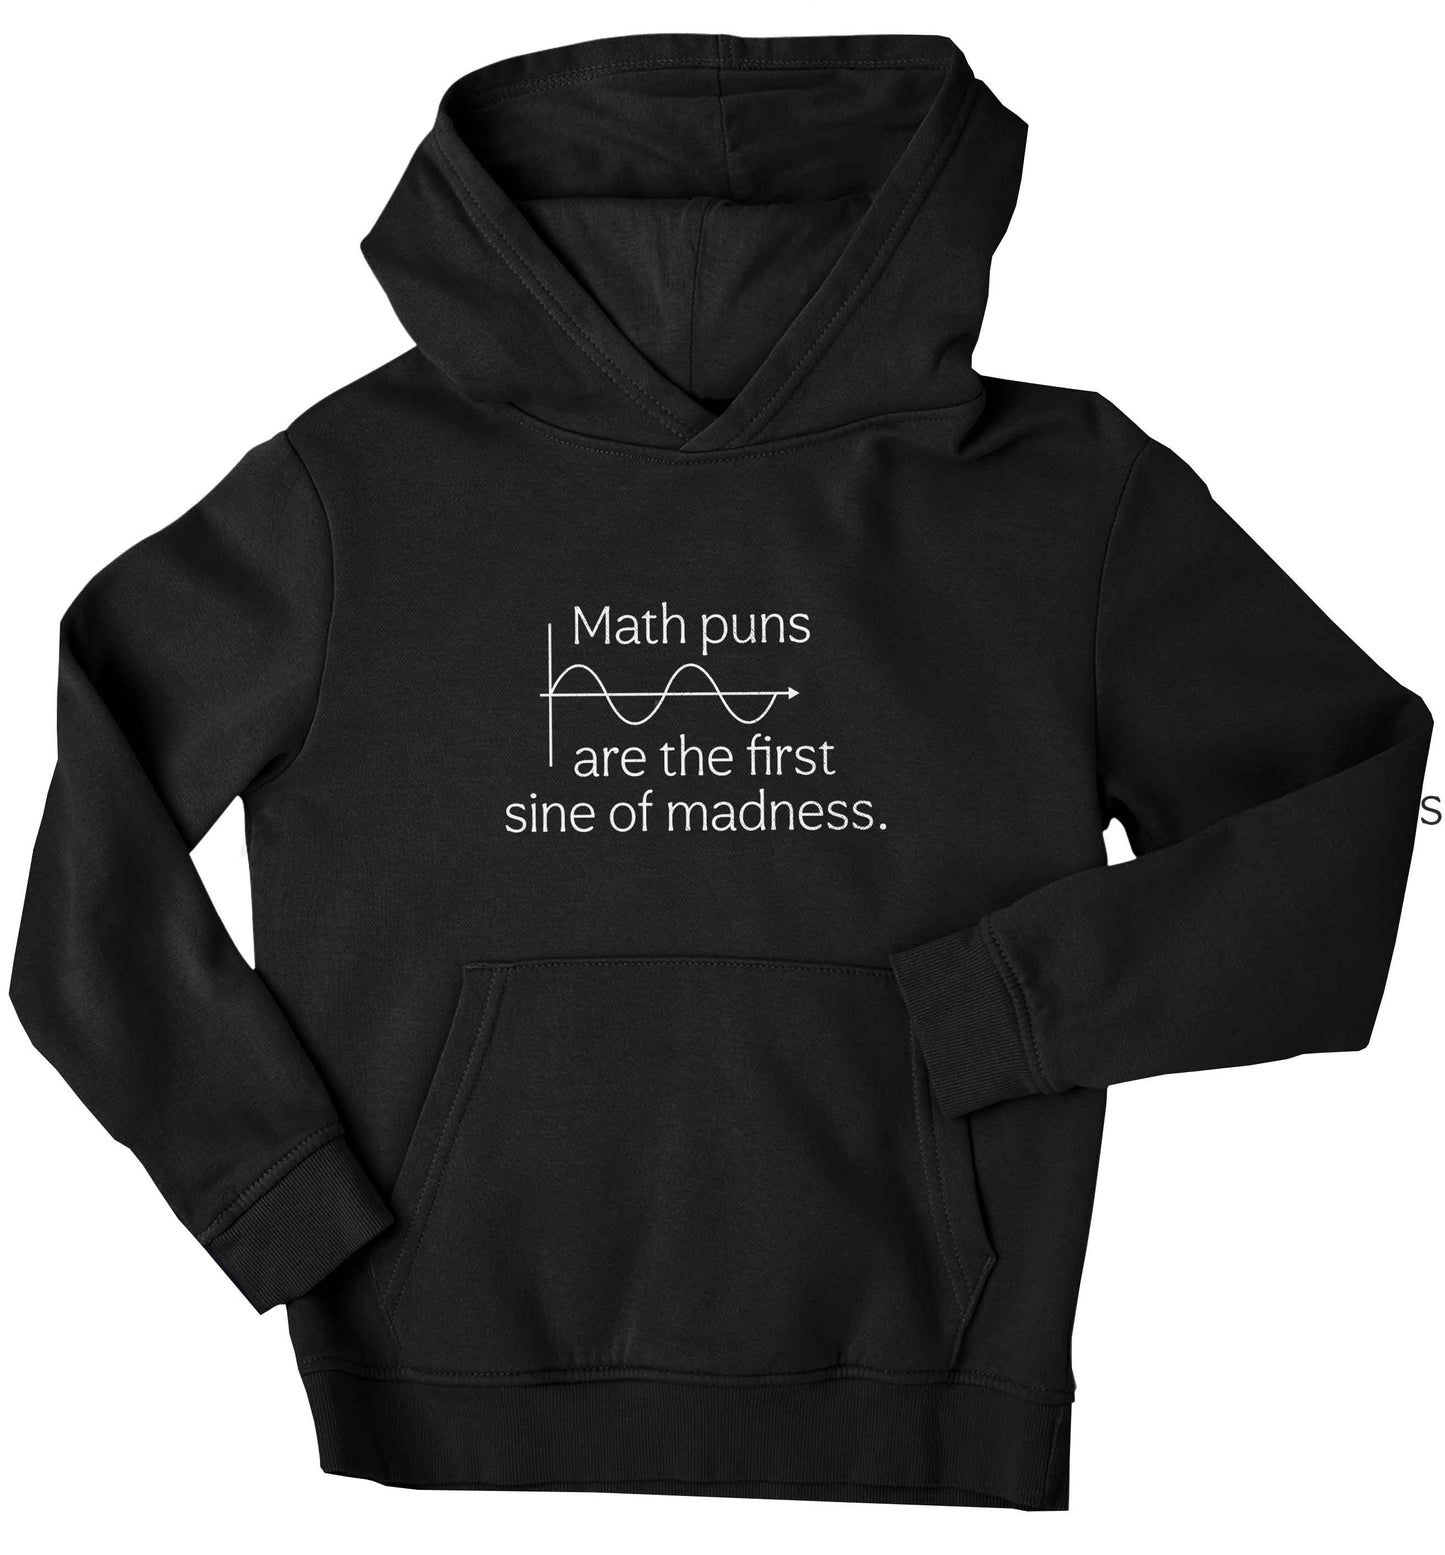 Math puns are the first sine of madness children's black hoodie 12-13 Years